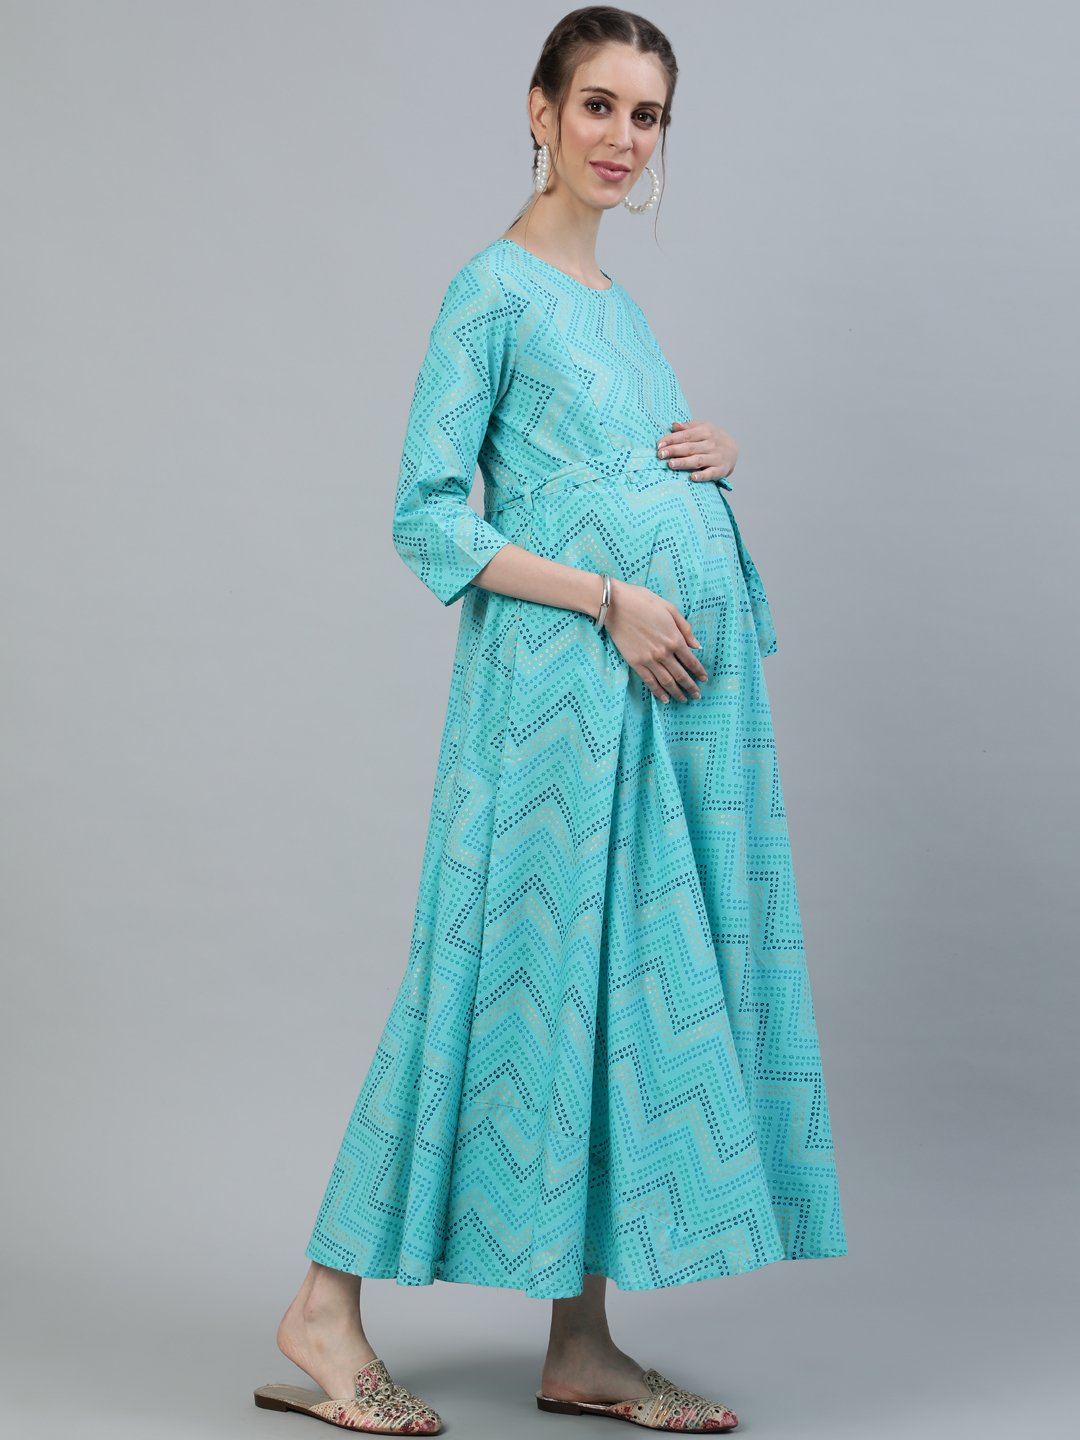 Women's Blue Printed Maternity Dress With Three Quarter Sleeves - Nayo Clothing